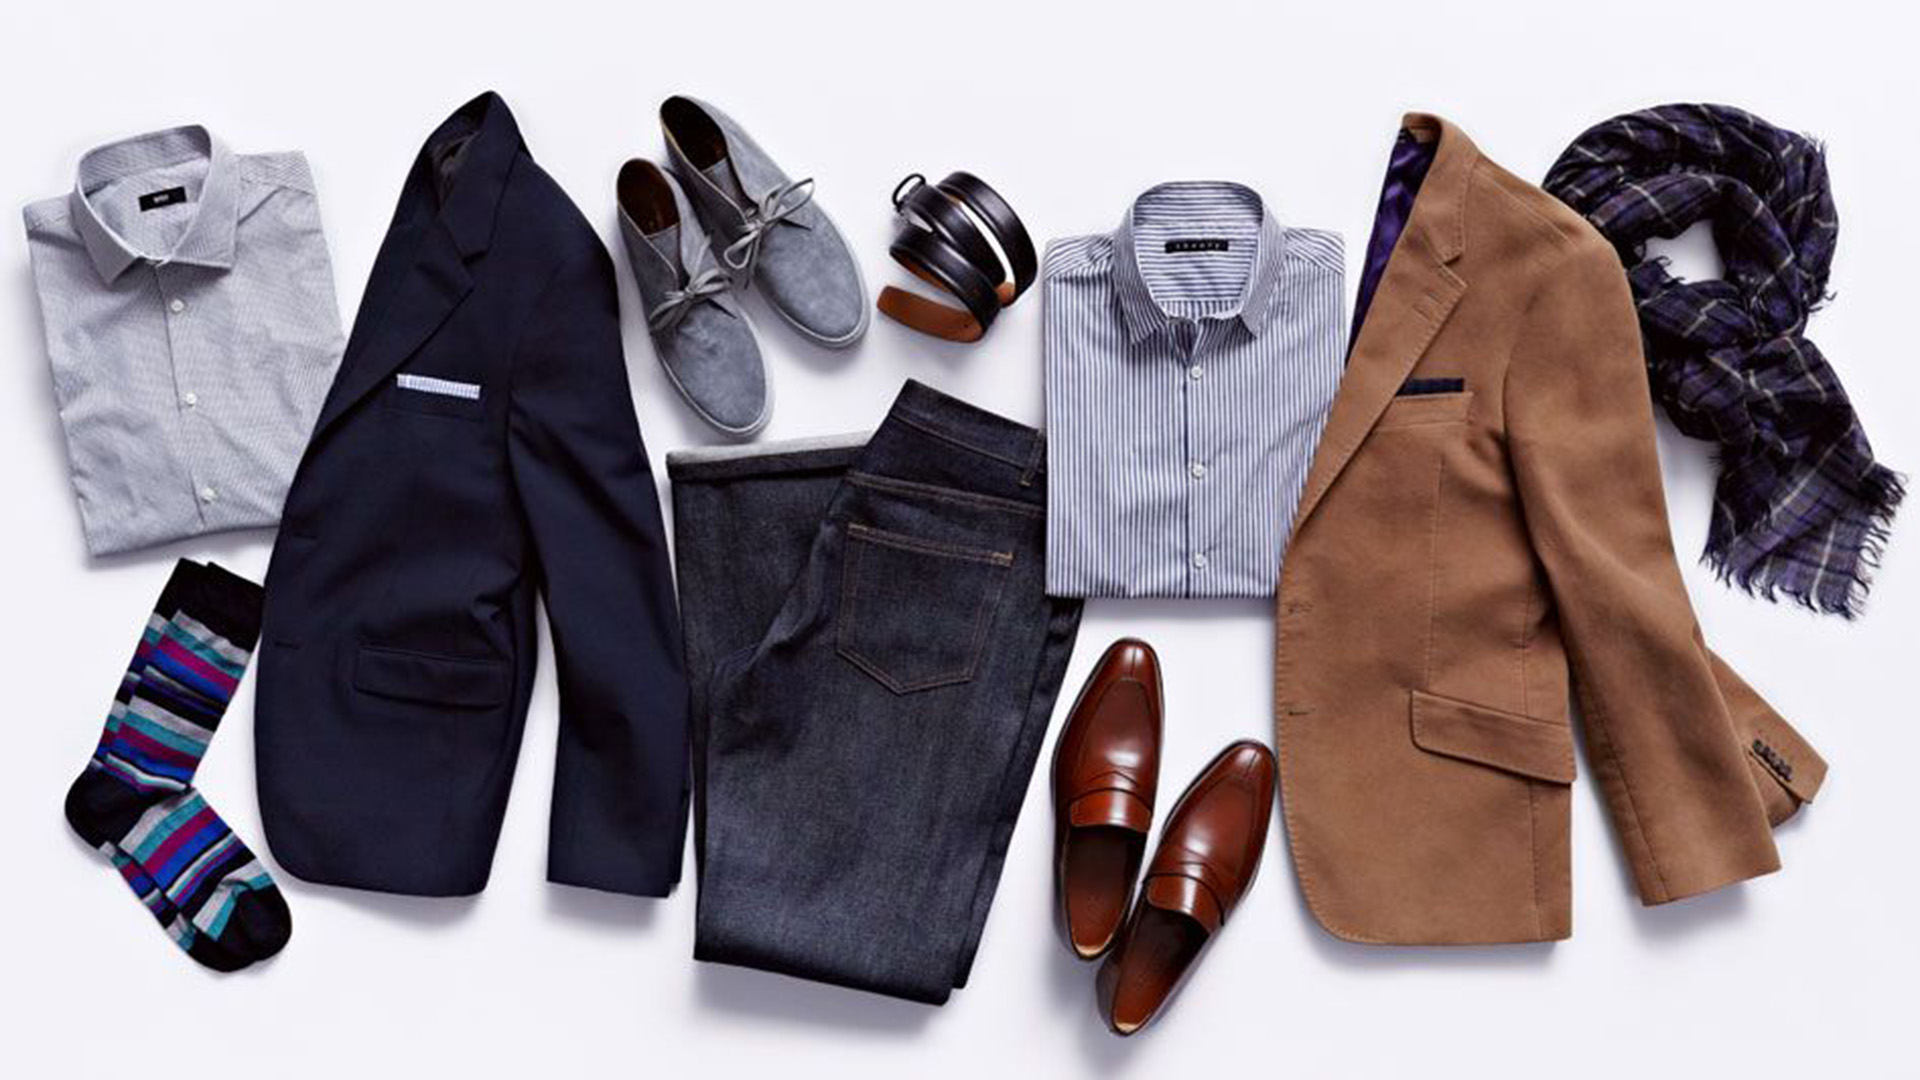 10 Items that Will Make Your Wardrobe Minimal Styled and Classy